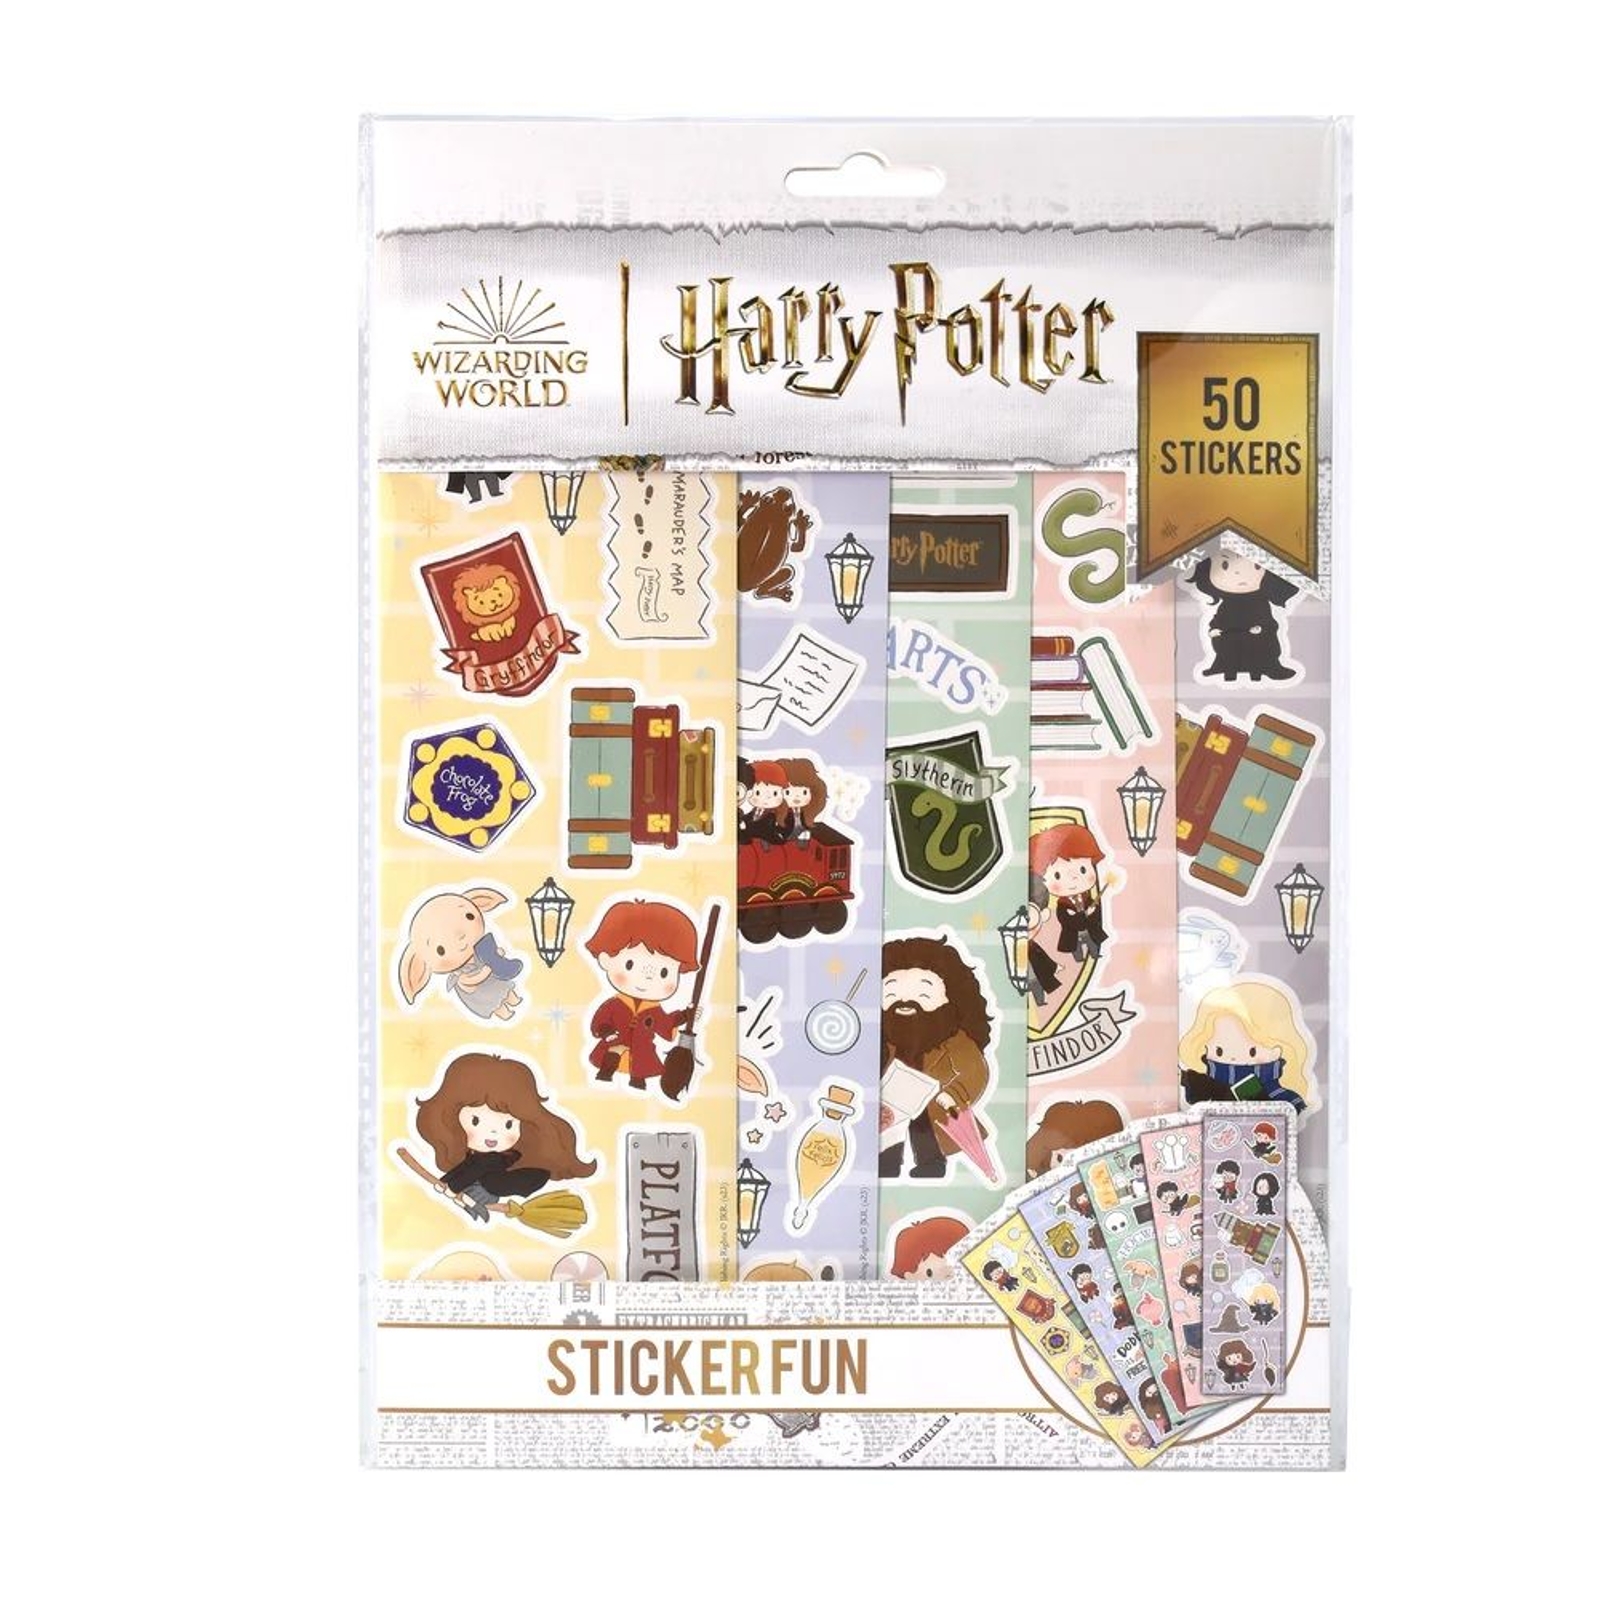 Harry Potter Sticker Fun - The Shop That Must Not Be Named